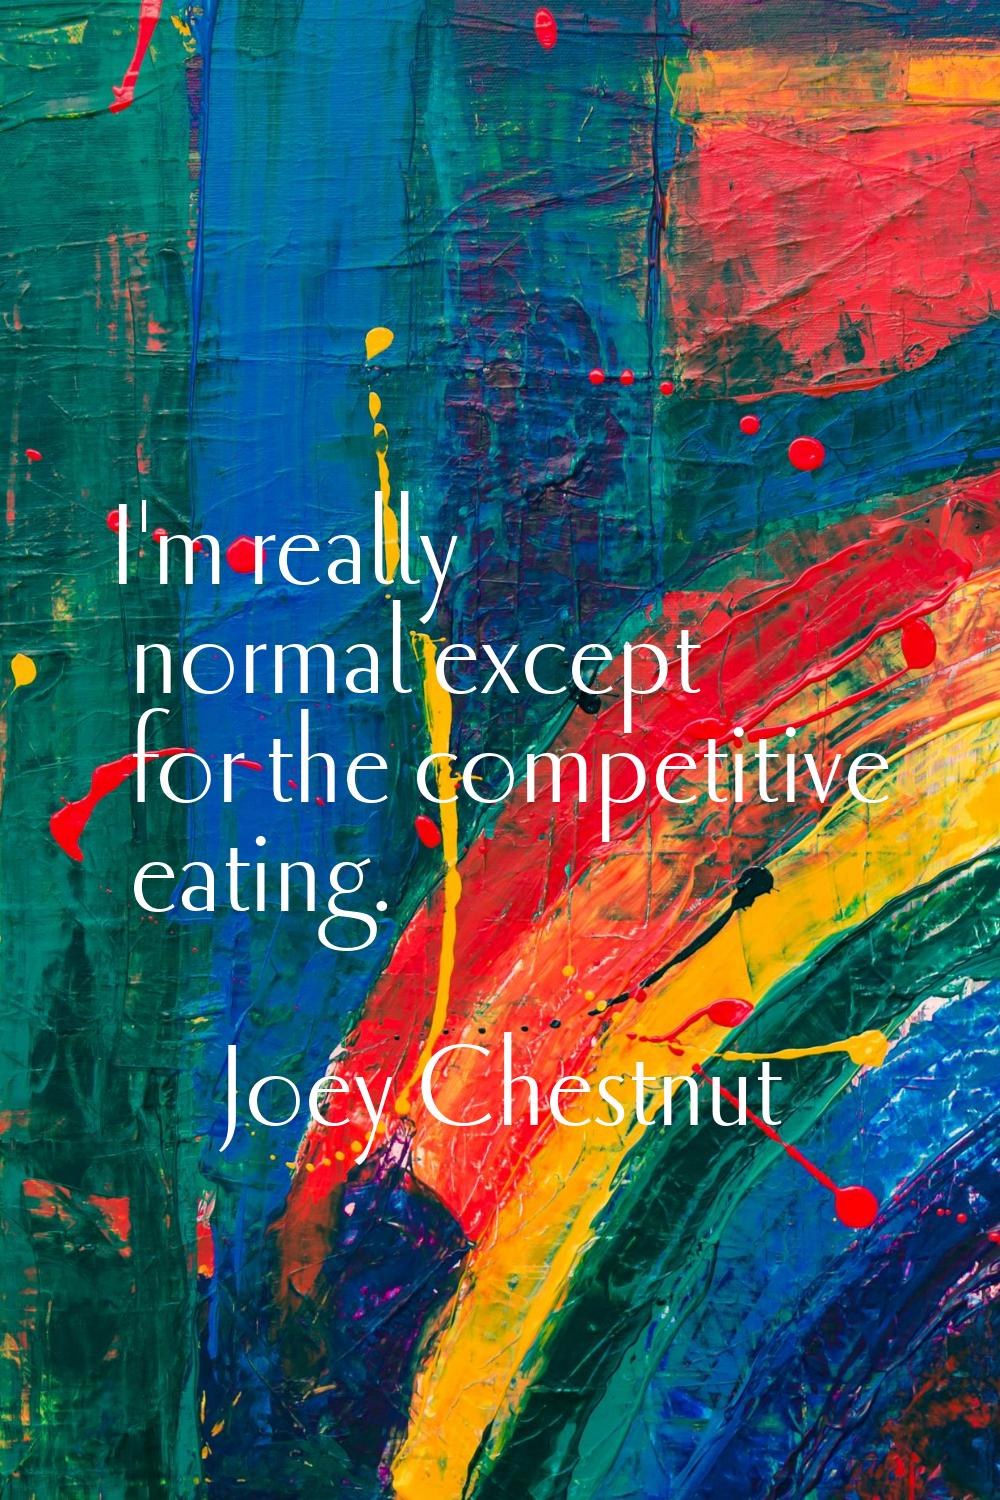 I'm really normal except for the competitive eating.